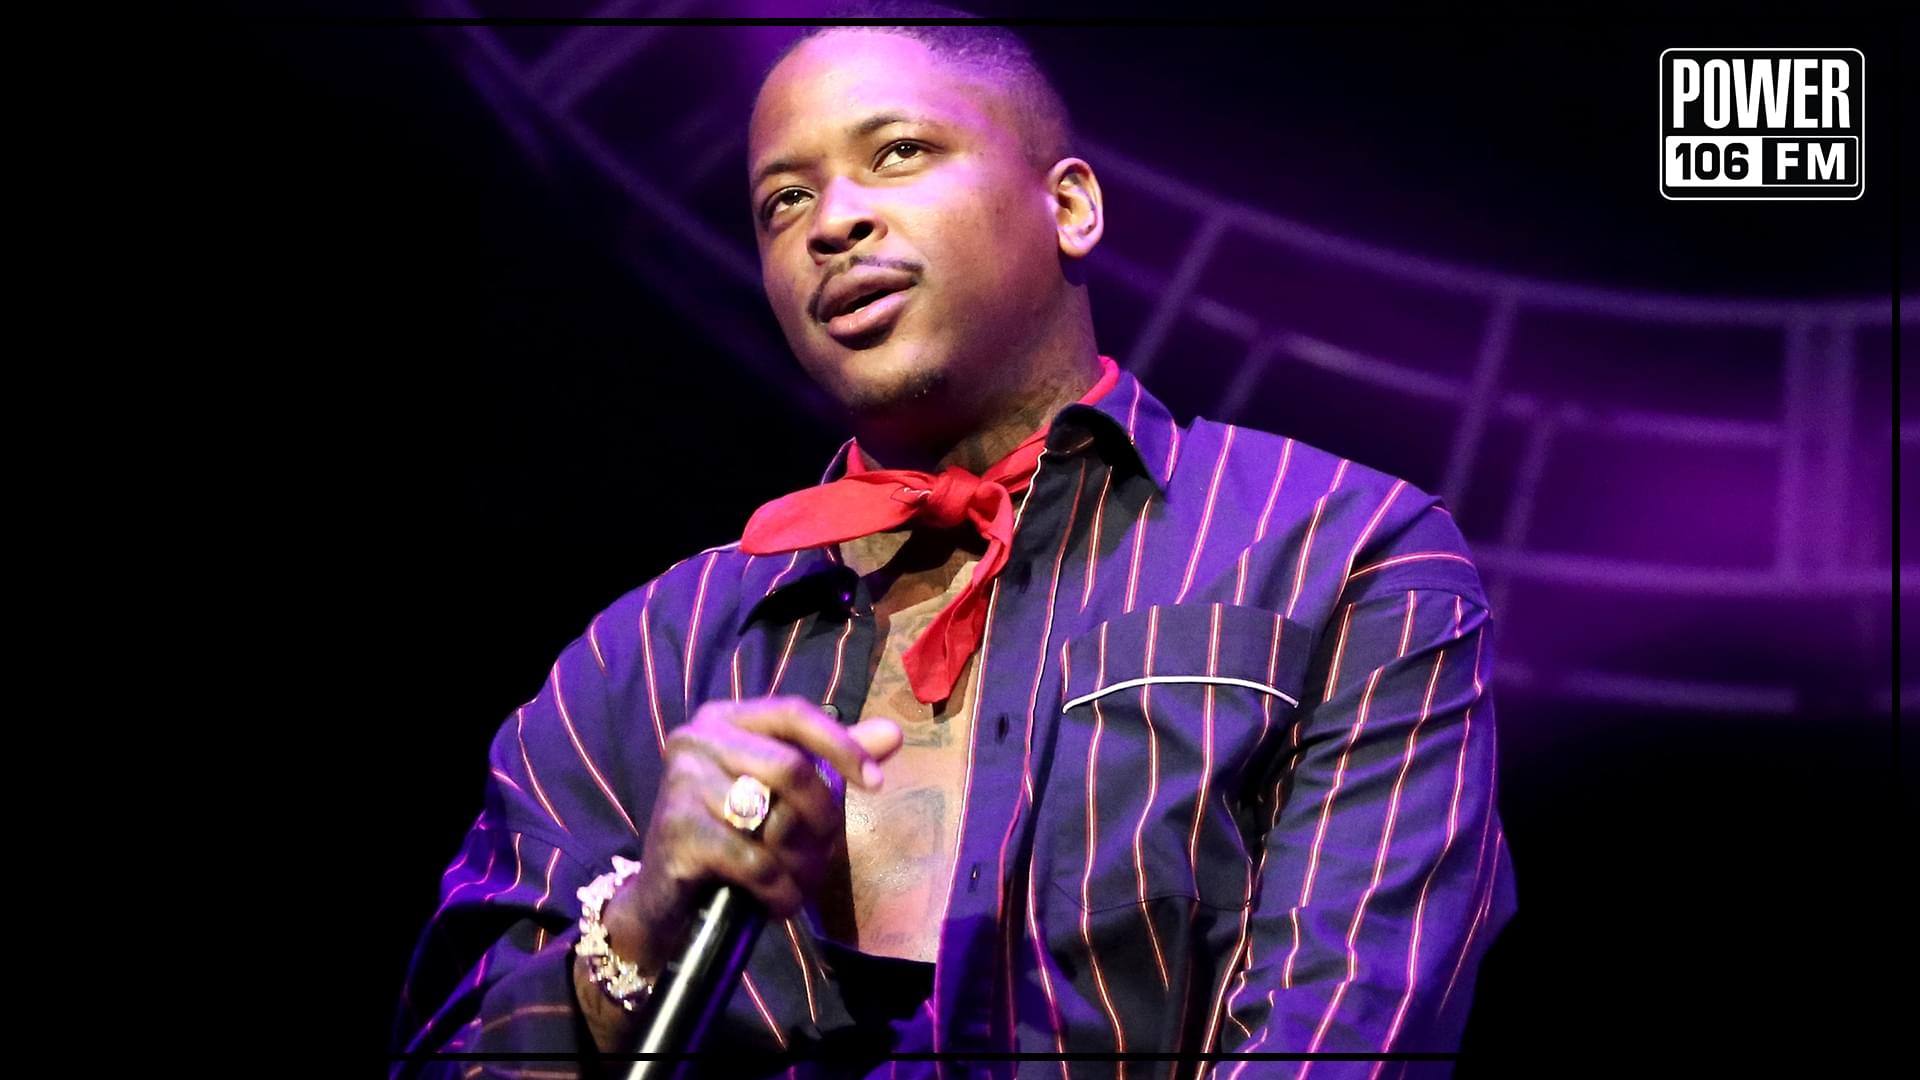 Daily Dose- Are There Any YG Fans That Also Support Donald Trump? [WATCH]